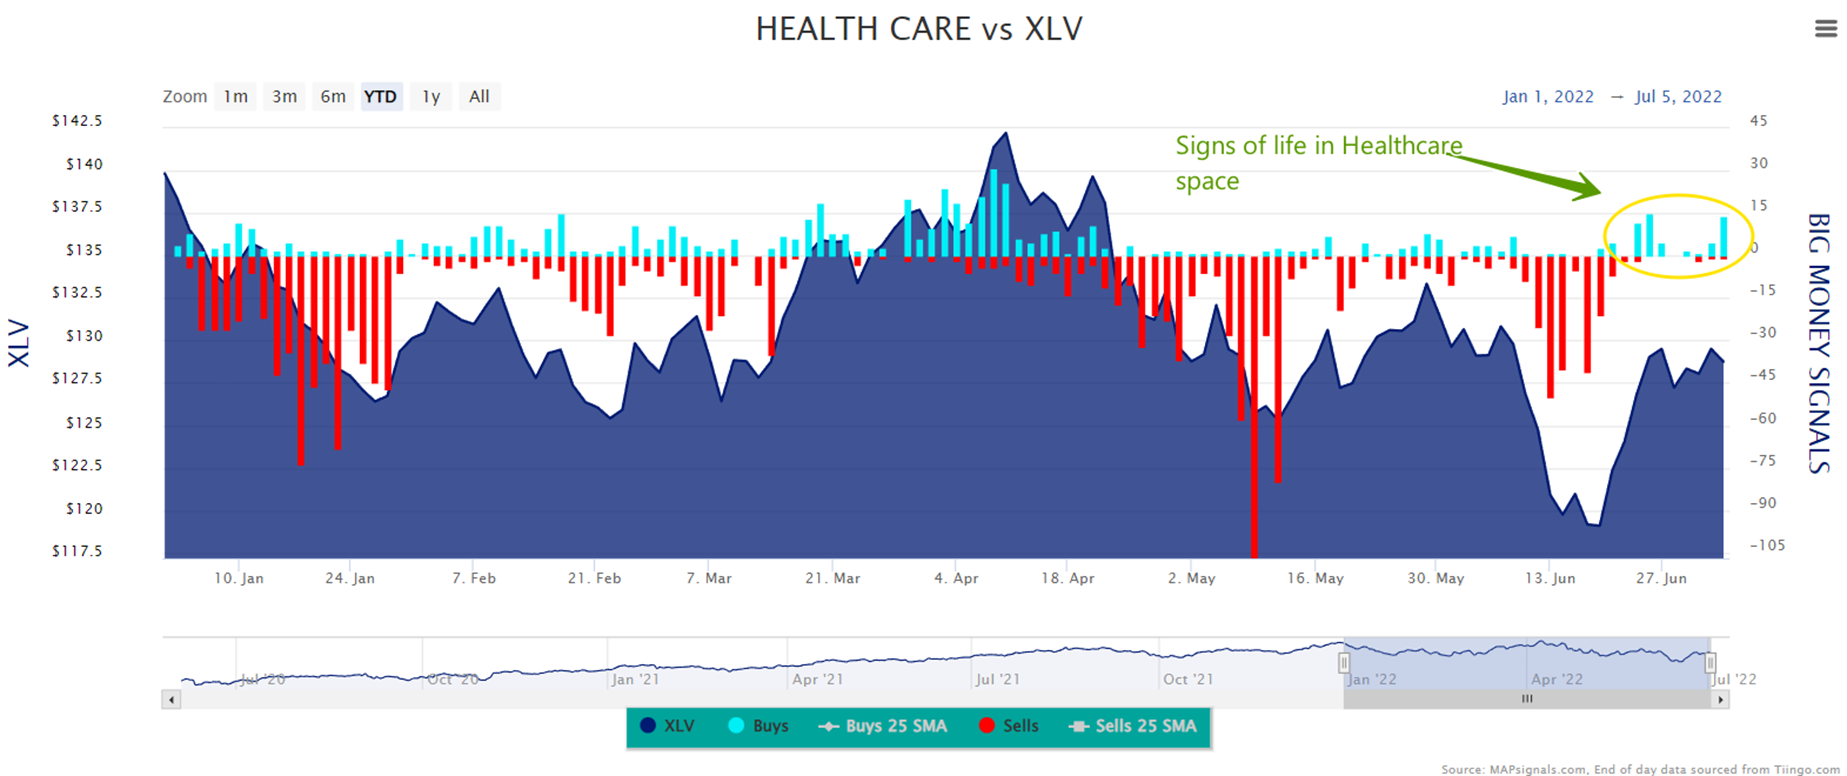 Signs of life in Healthcare space | Health Care vs XLV